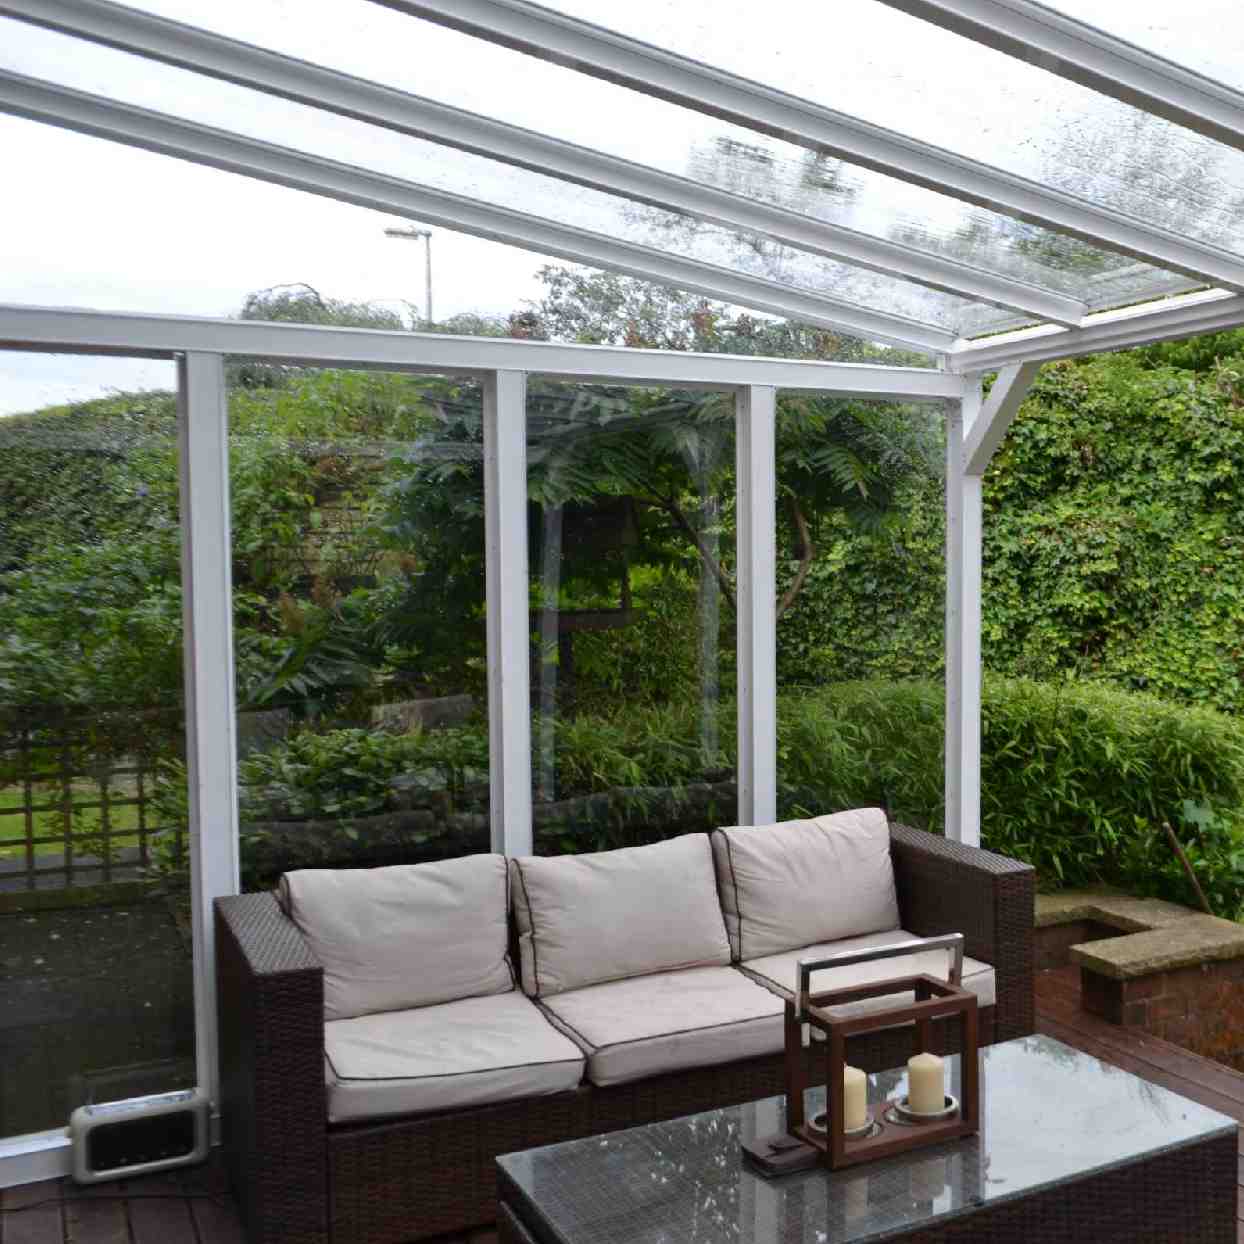 Buy Omega Verandah White with 6mm Glass Clear Plate Polycarbonate Glazing - 7.7m (W) x 2.0m (P), (4) Supporting Posts online today